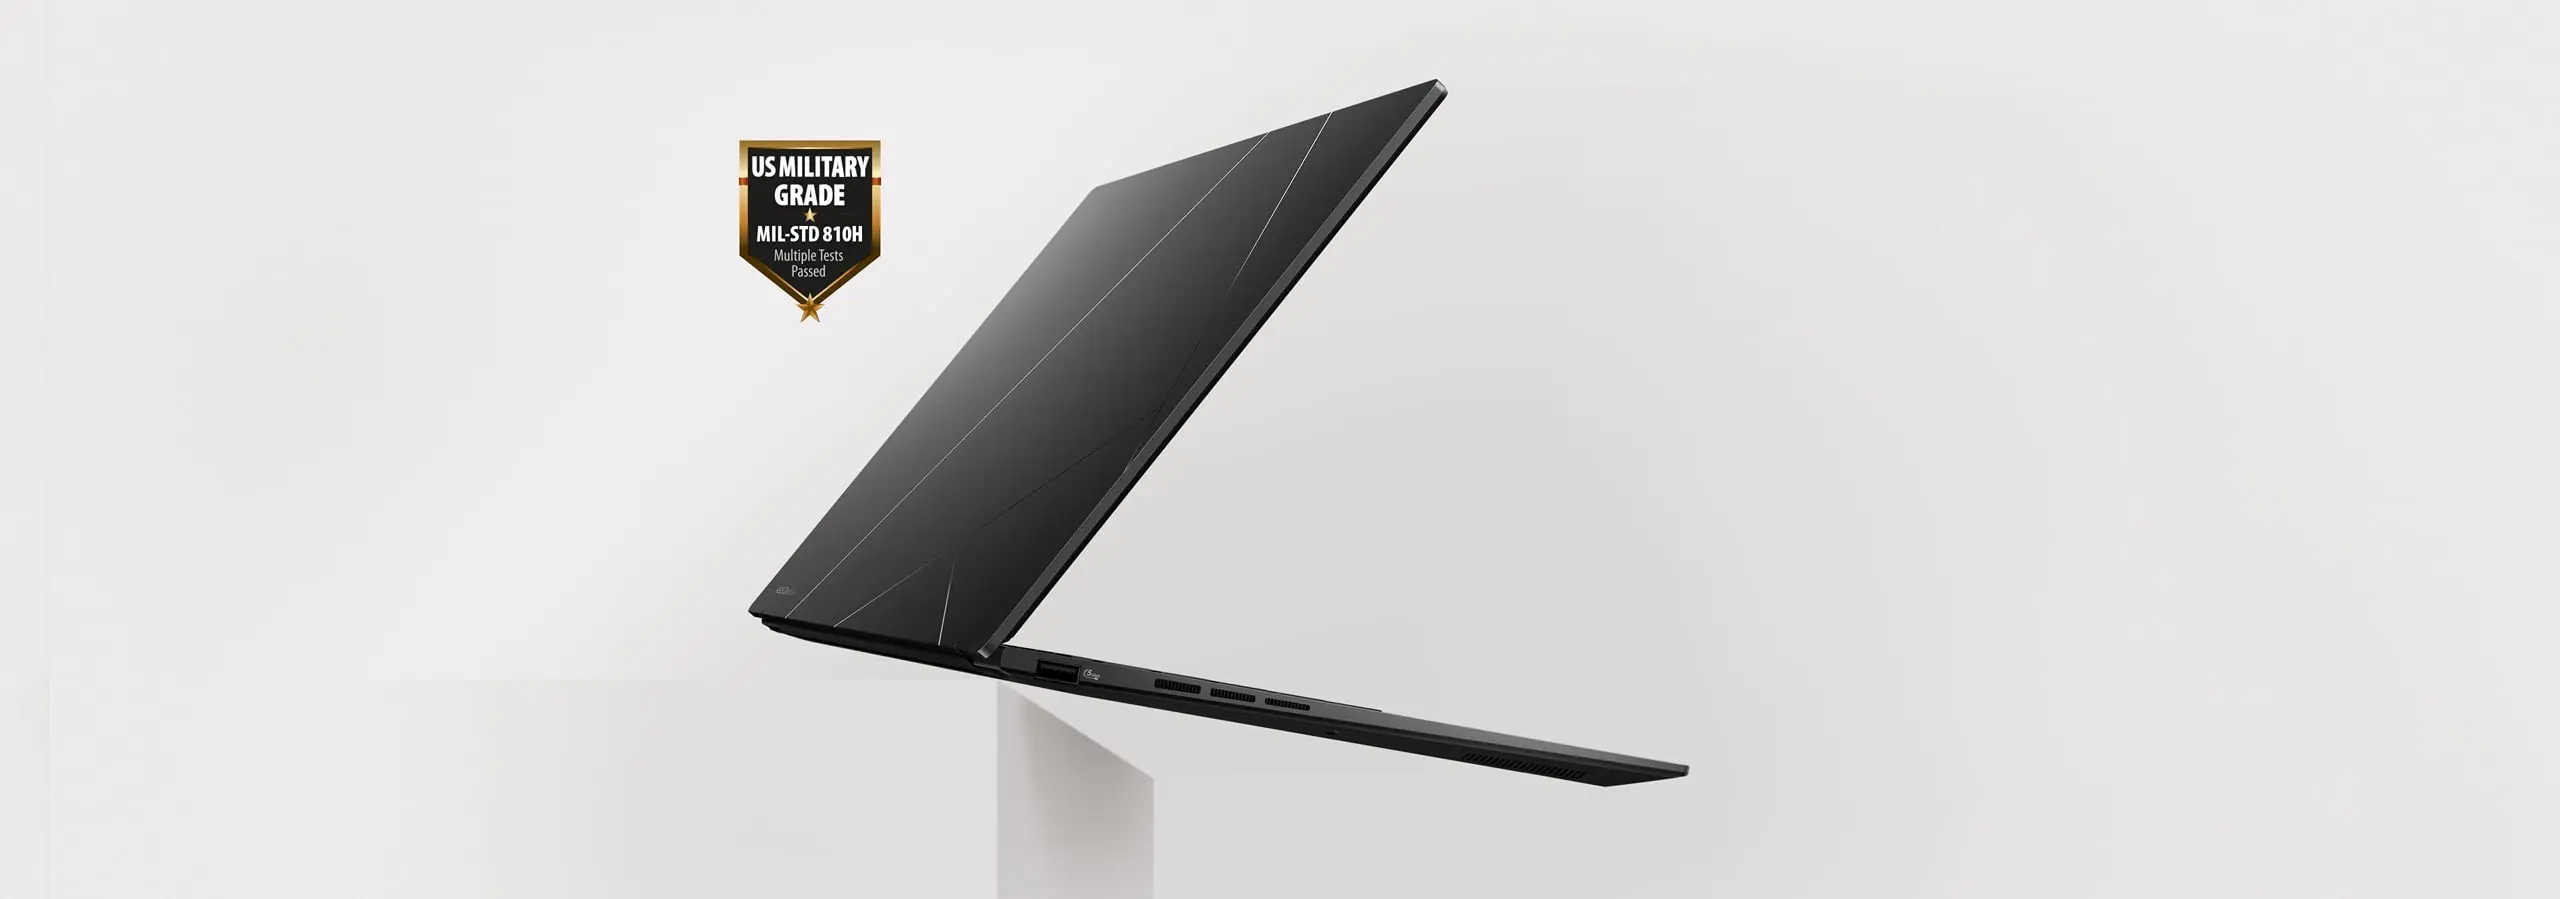 Zenbook 14 OLED laptop is floating in mid-air with US military garde icon next to it.